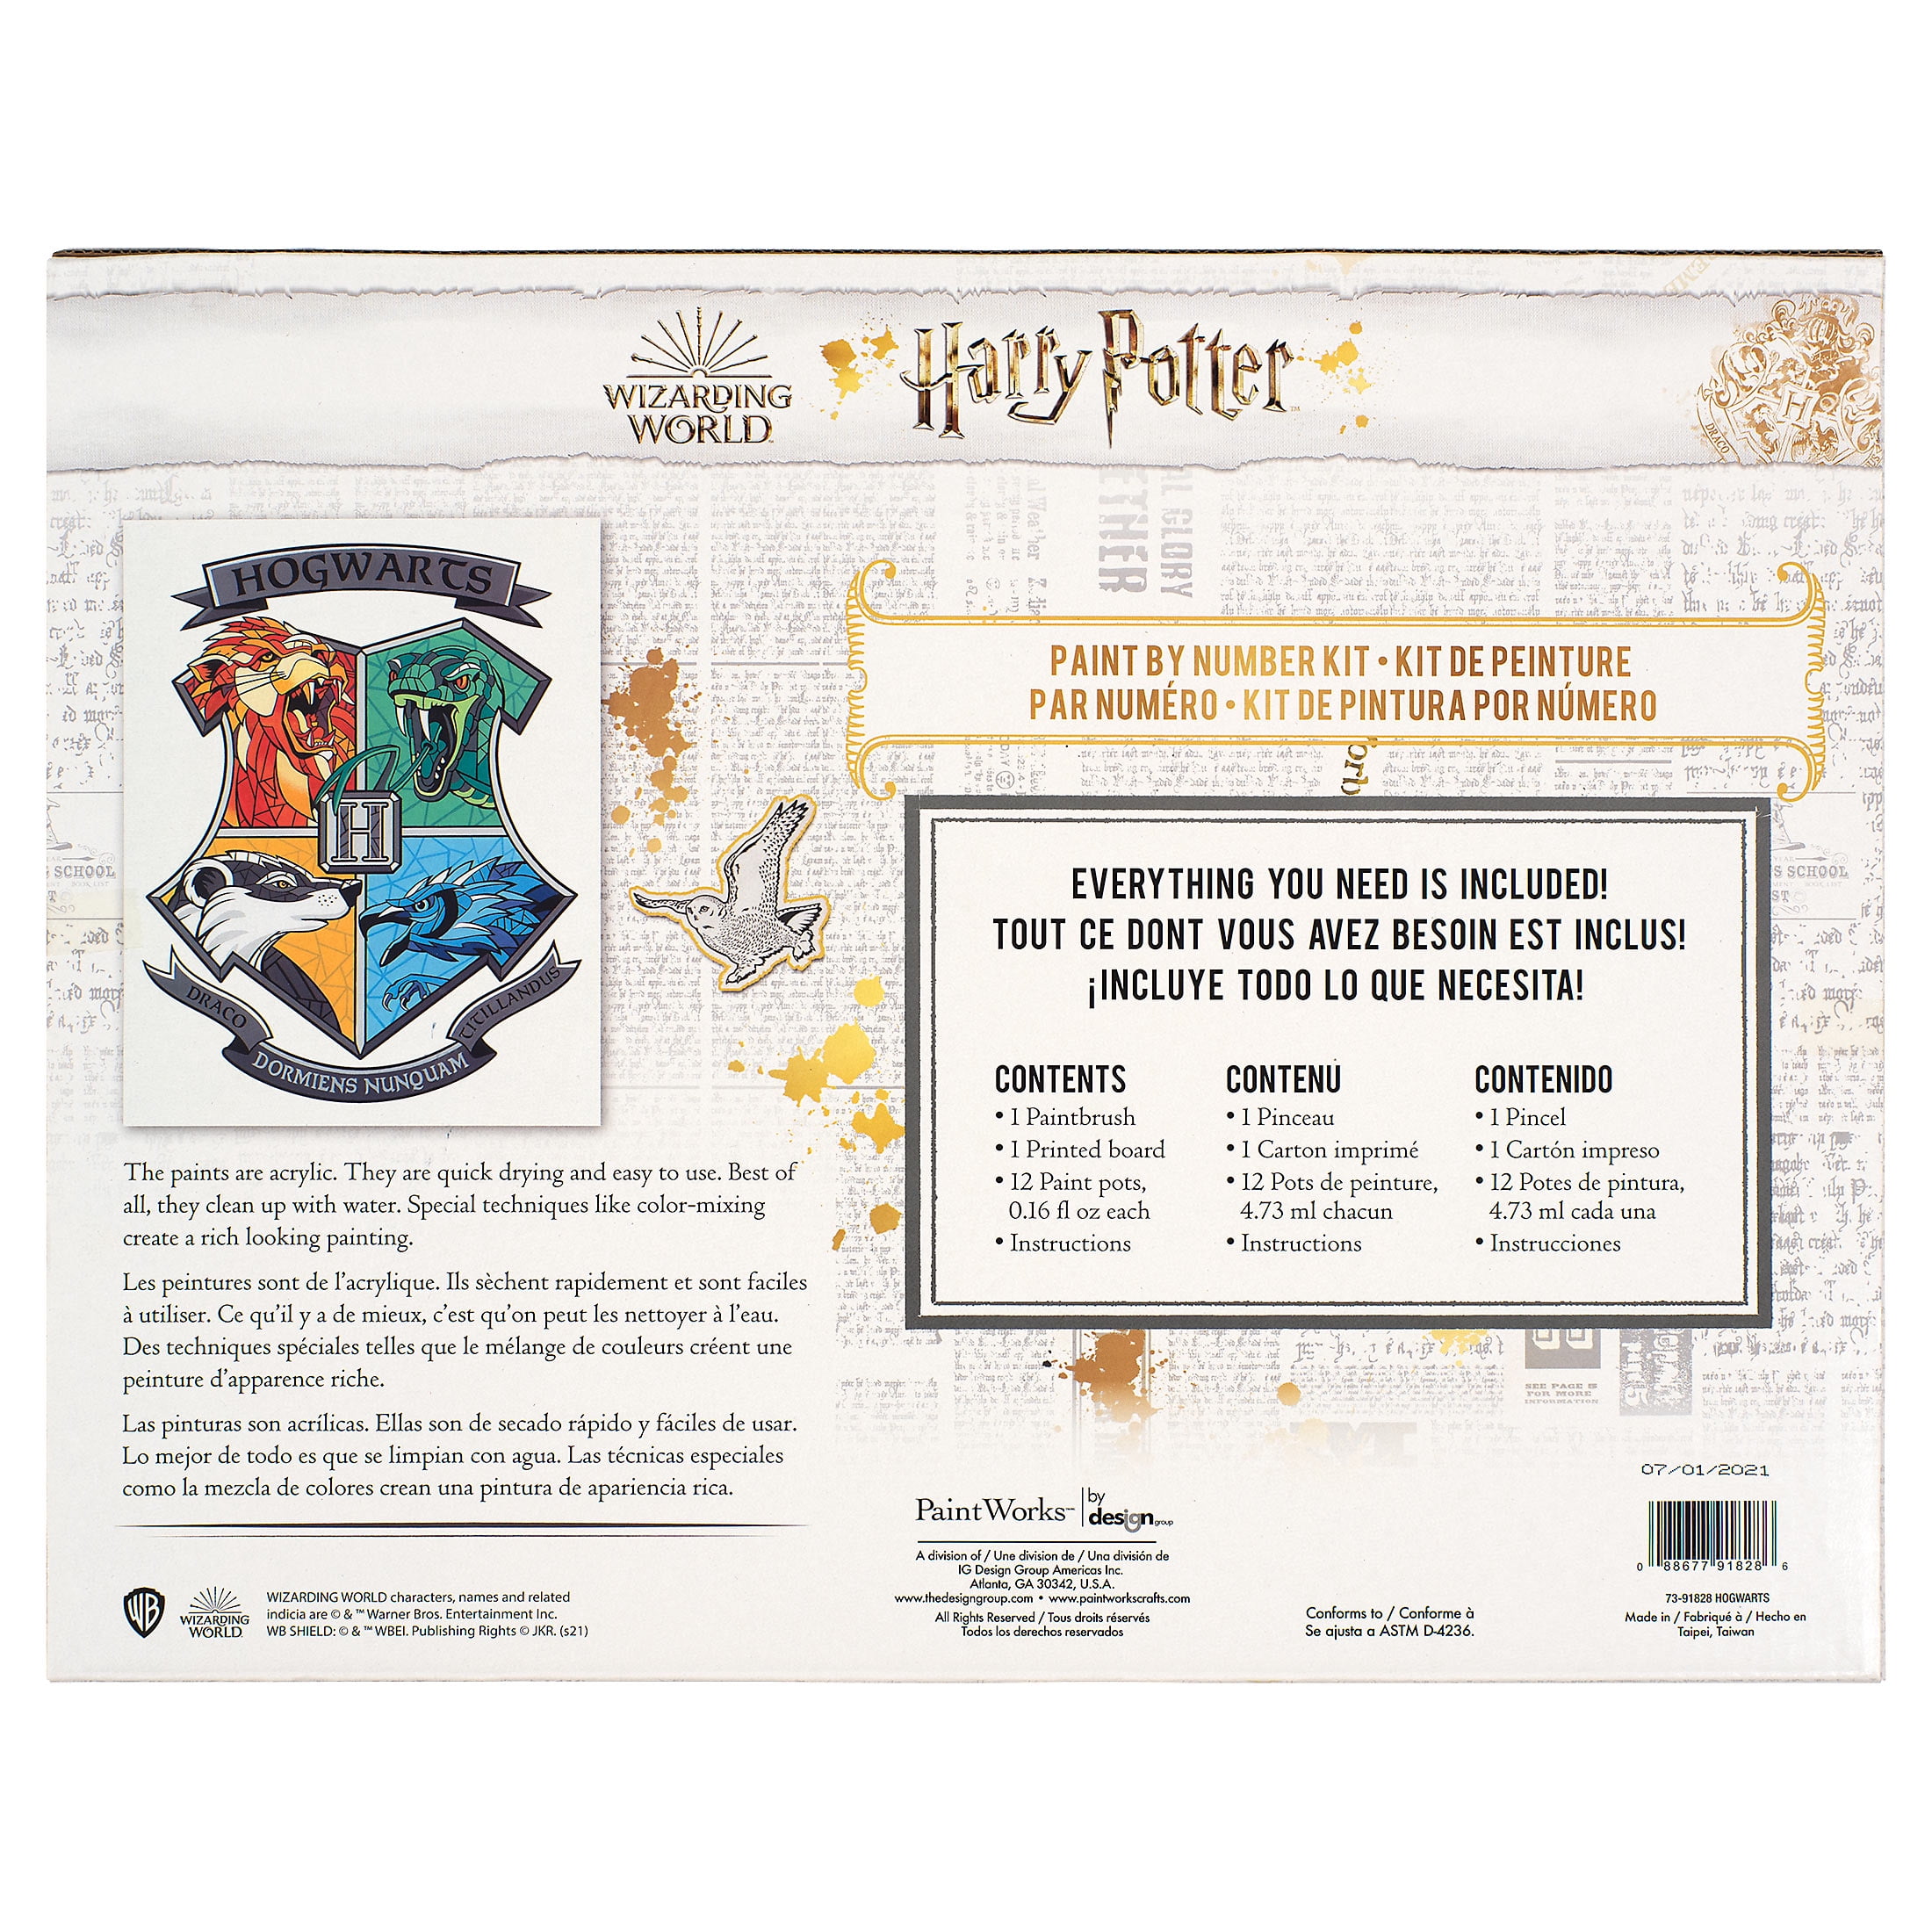 Marauders Map Harry Potter Paint By Numbers